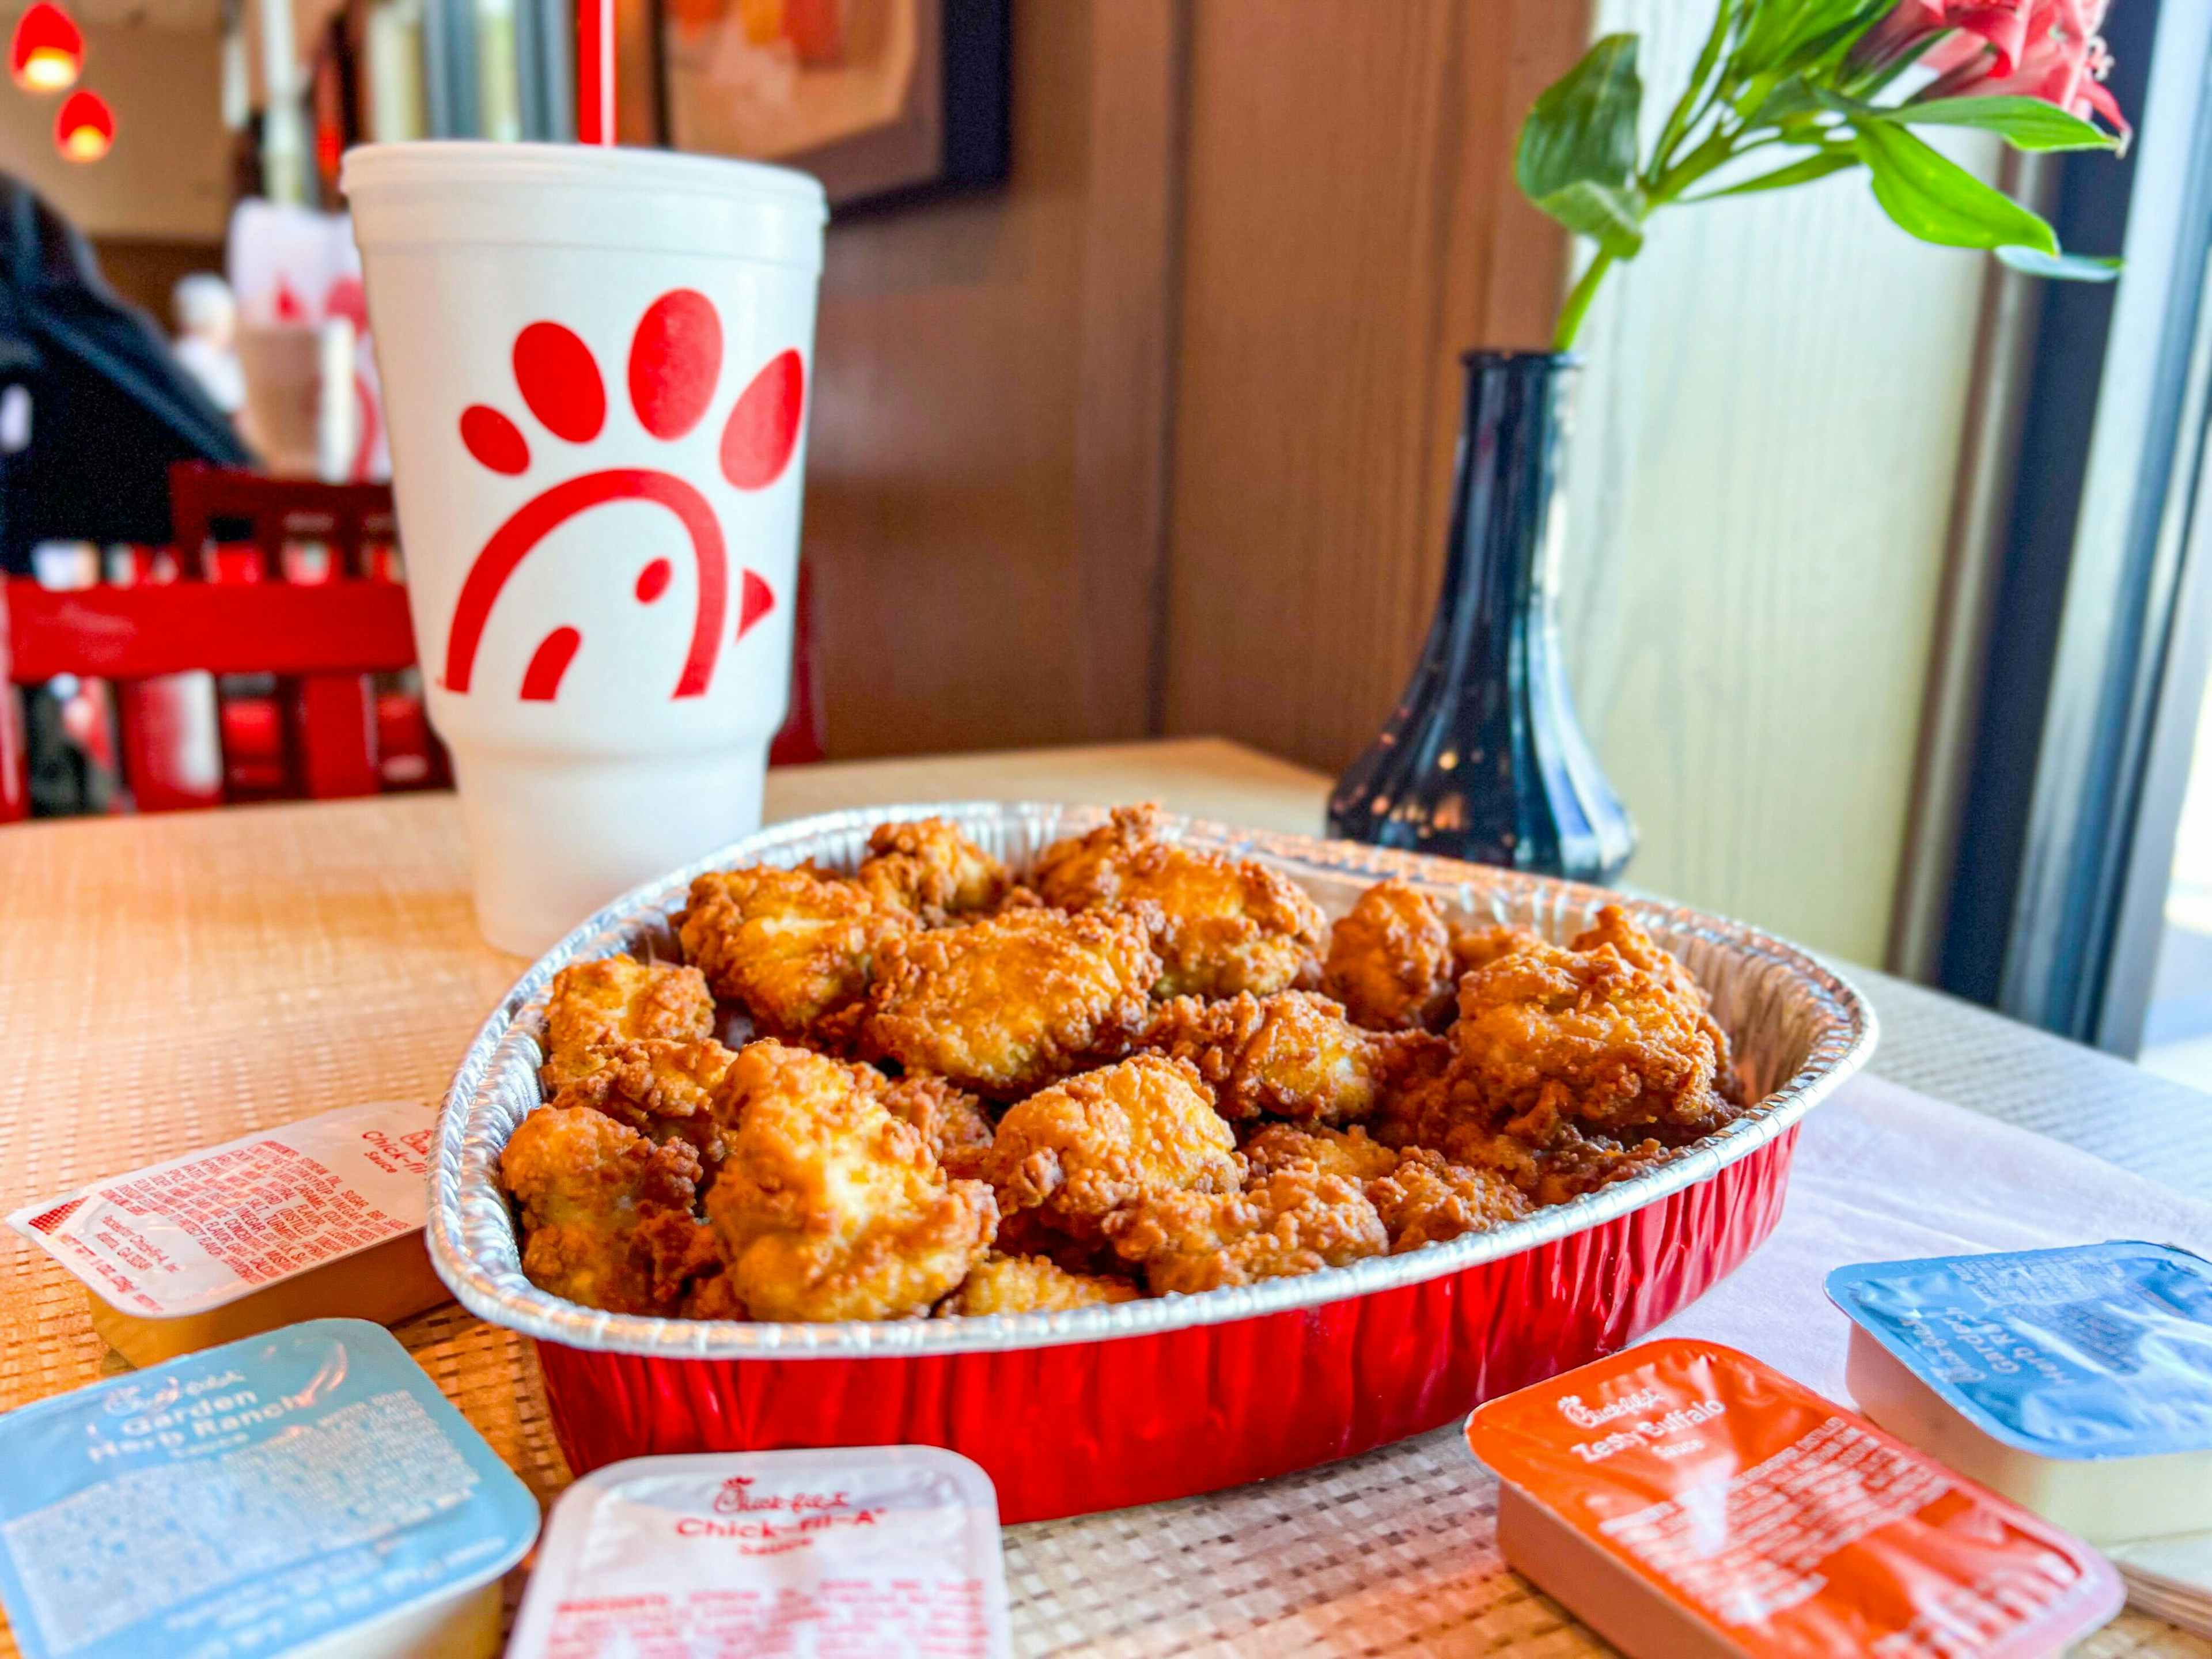 chick-fil-a-valentines-day-heart-tray-chicken-nuggets-kcl-13